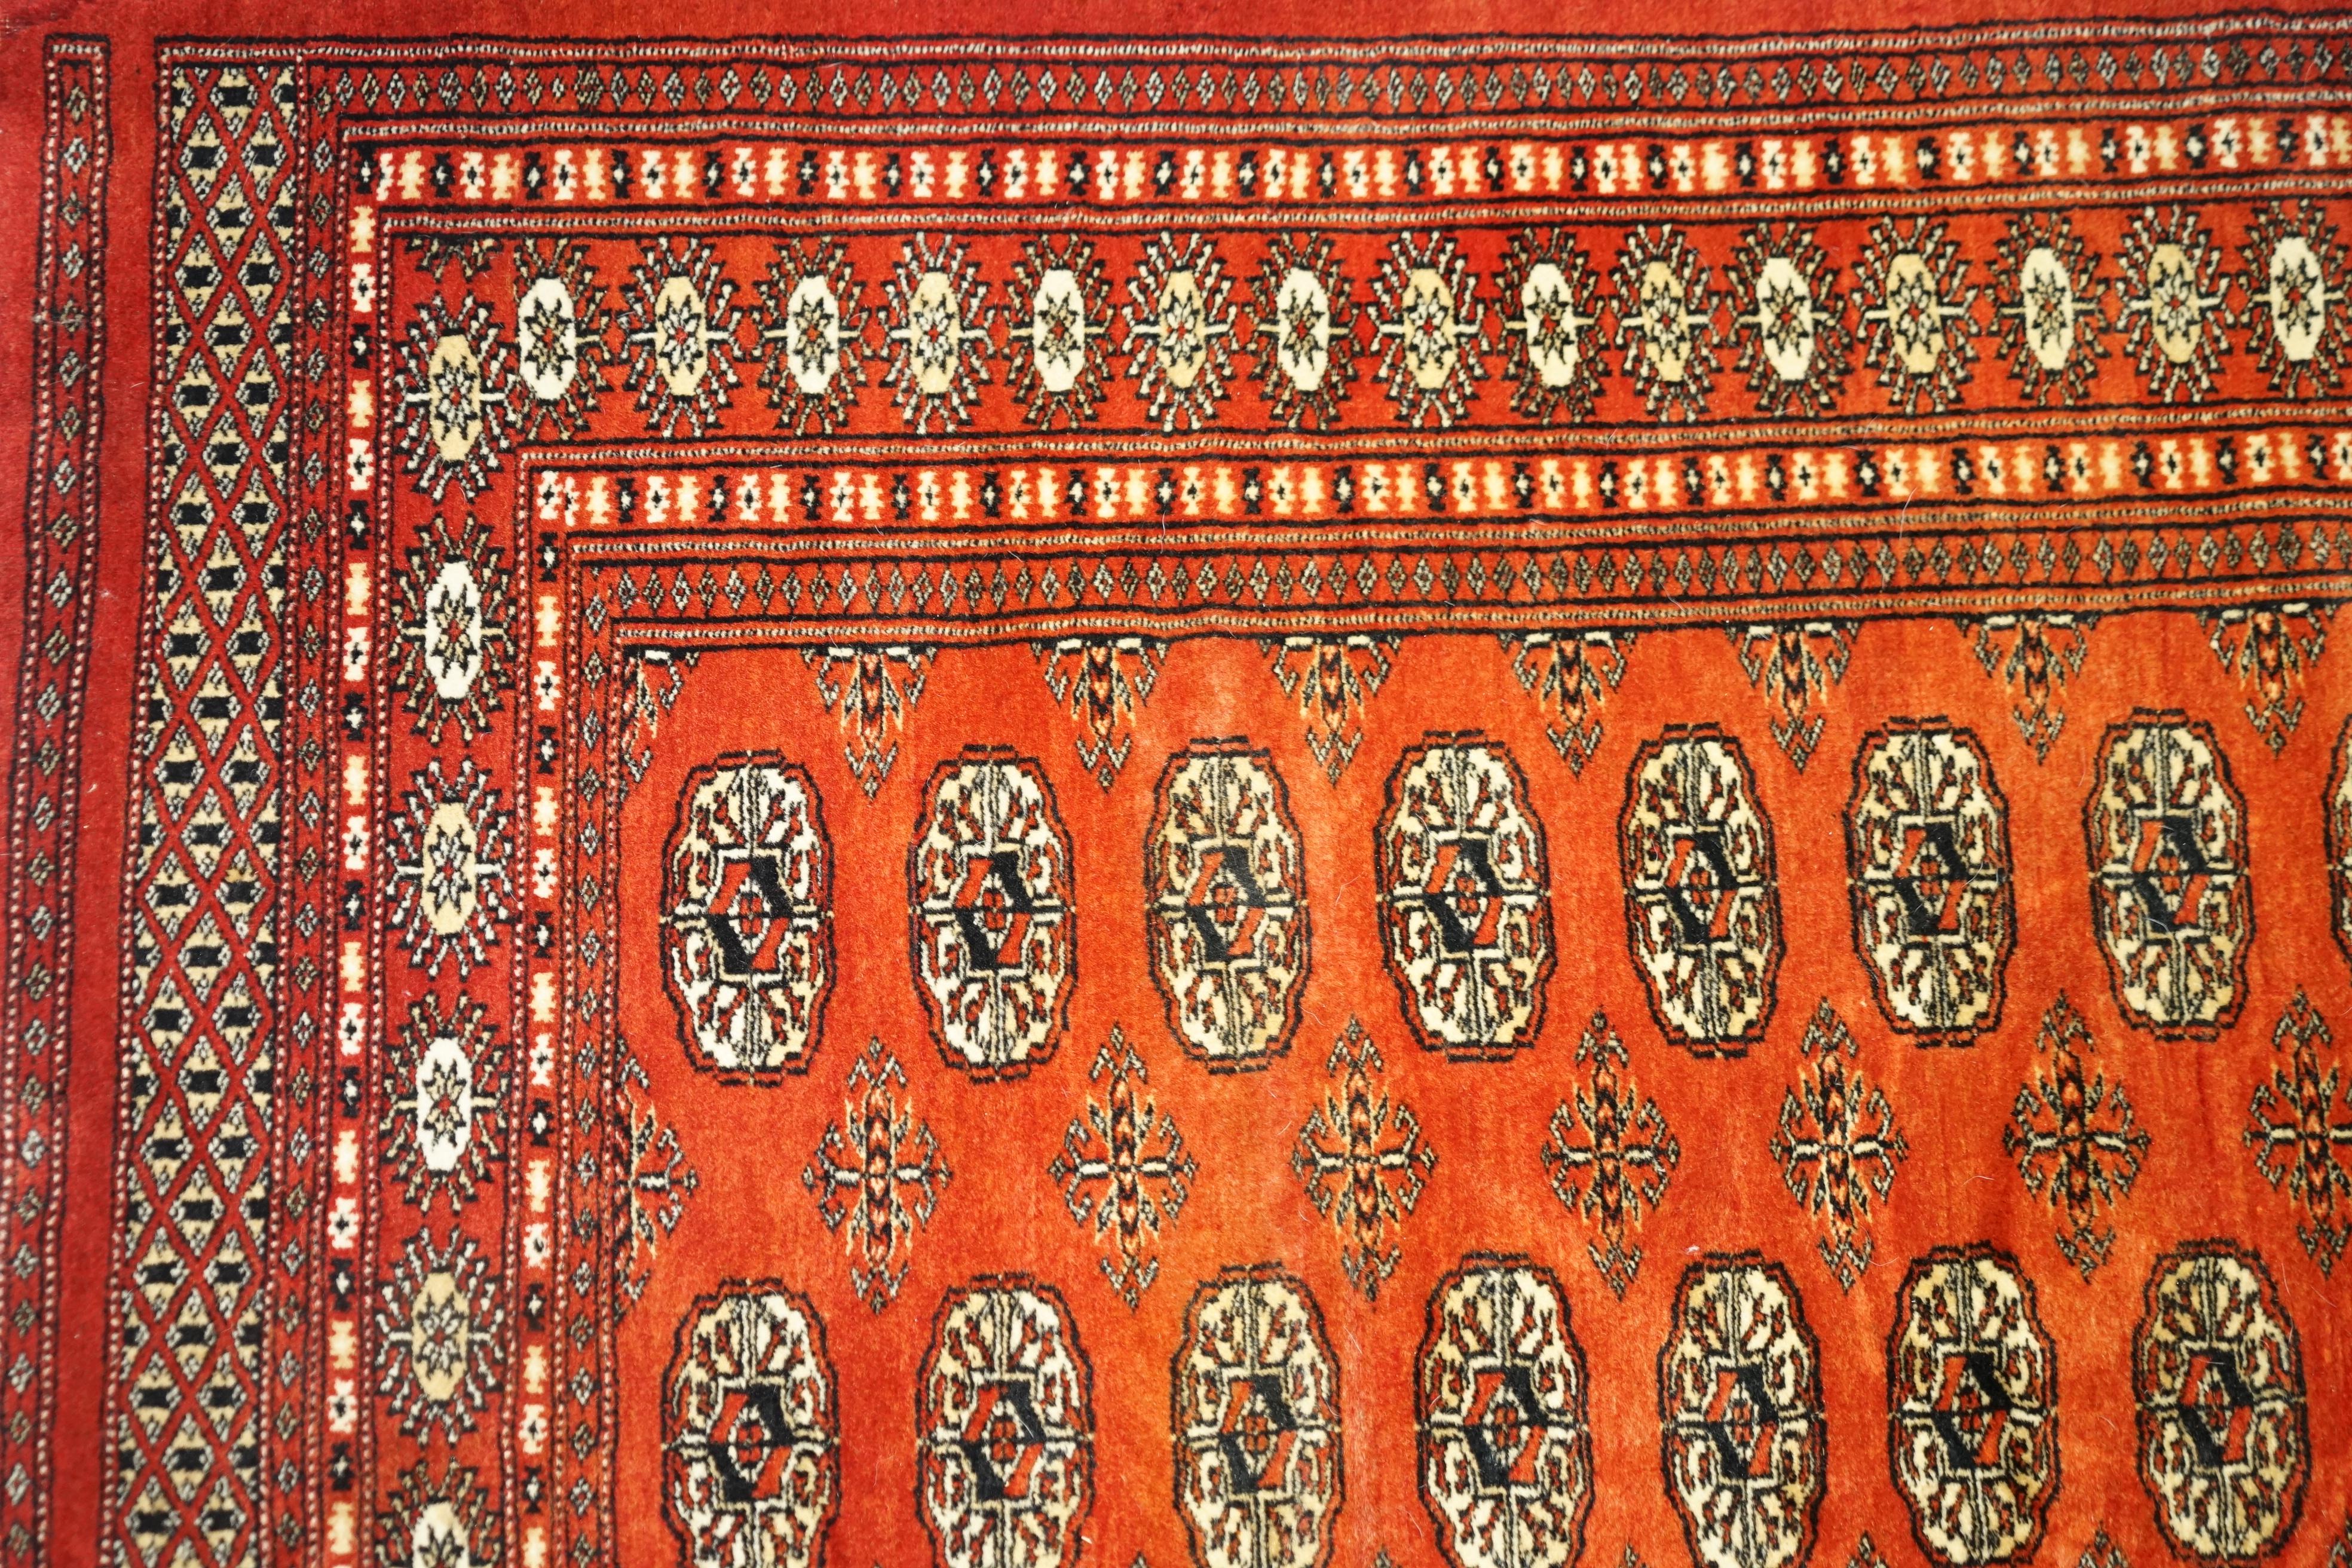 20th Century Decorative Floral Rug Medium Sized 96.5cm x 188cm Fine Hand Knotted For Sale